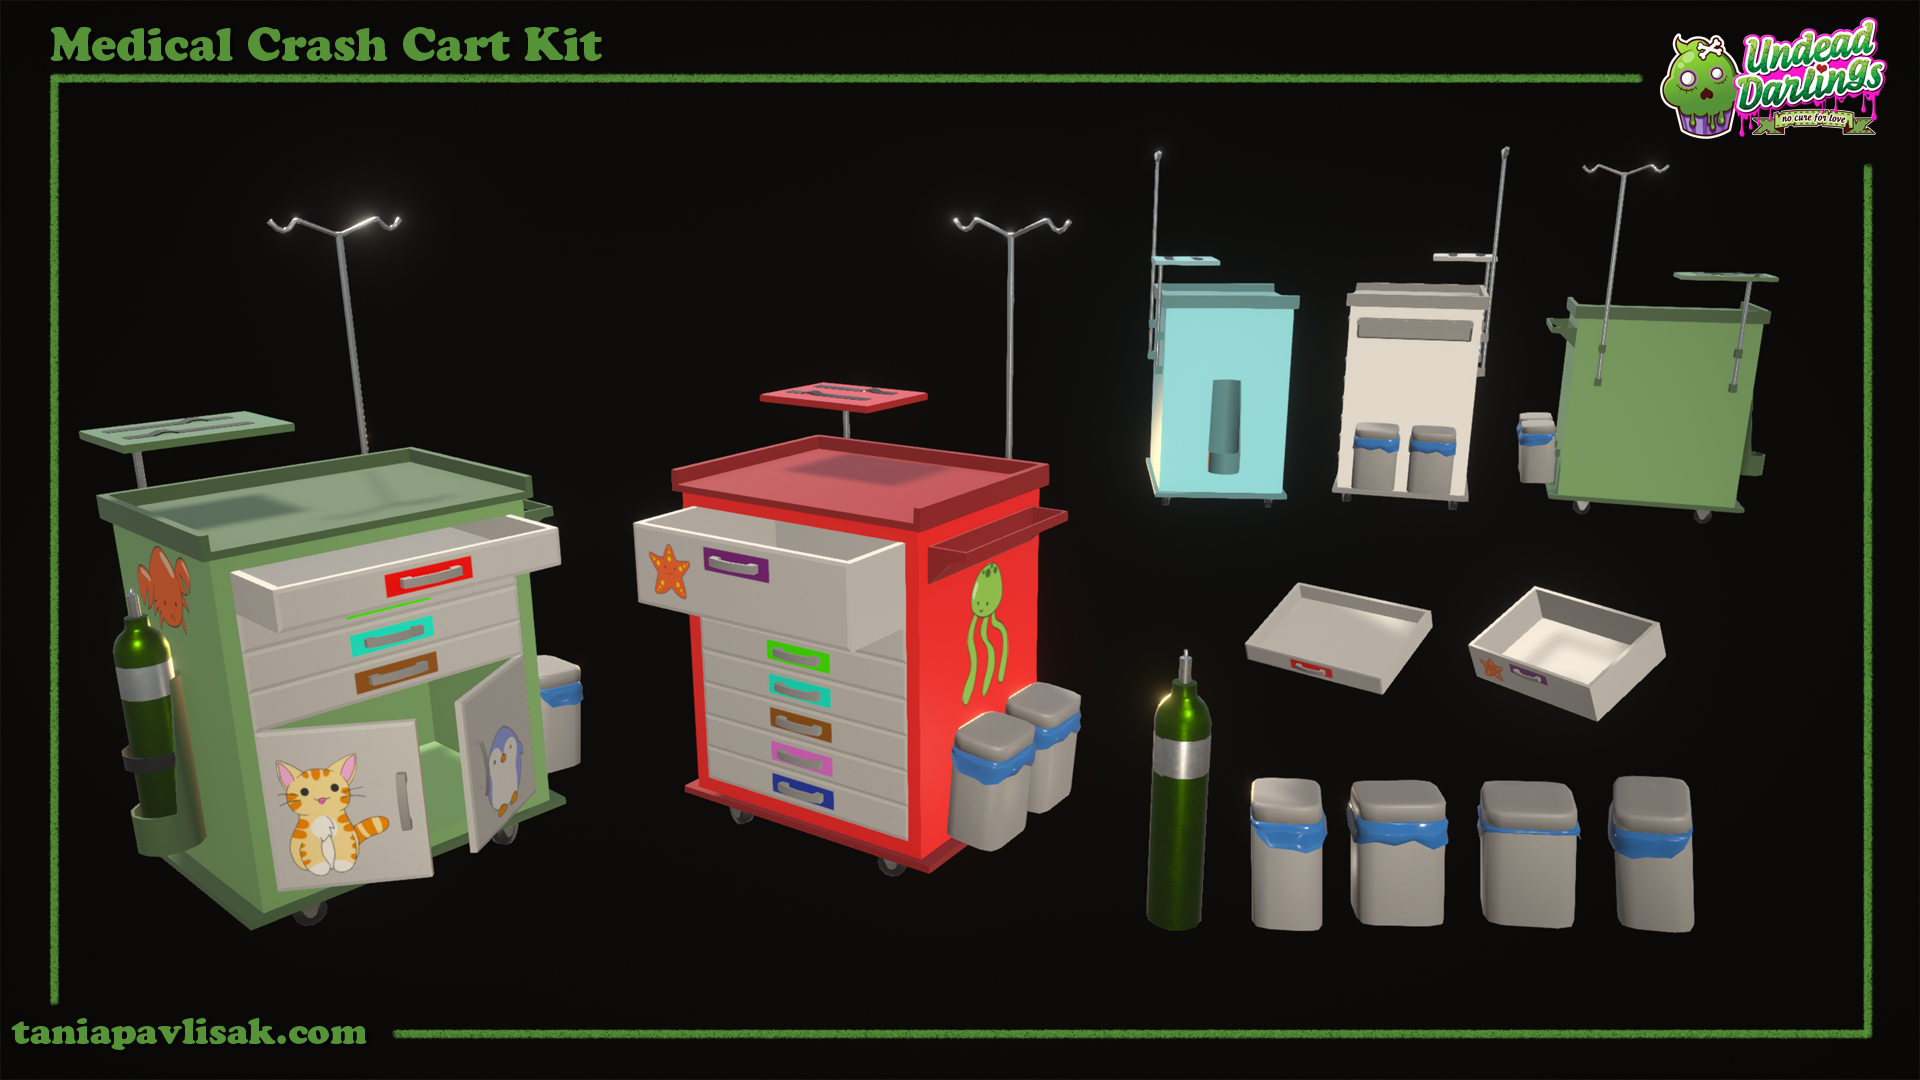 Colorful hospital crash cart, which come in 2 models. Some drawers and cabinet can be opened.